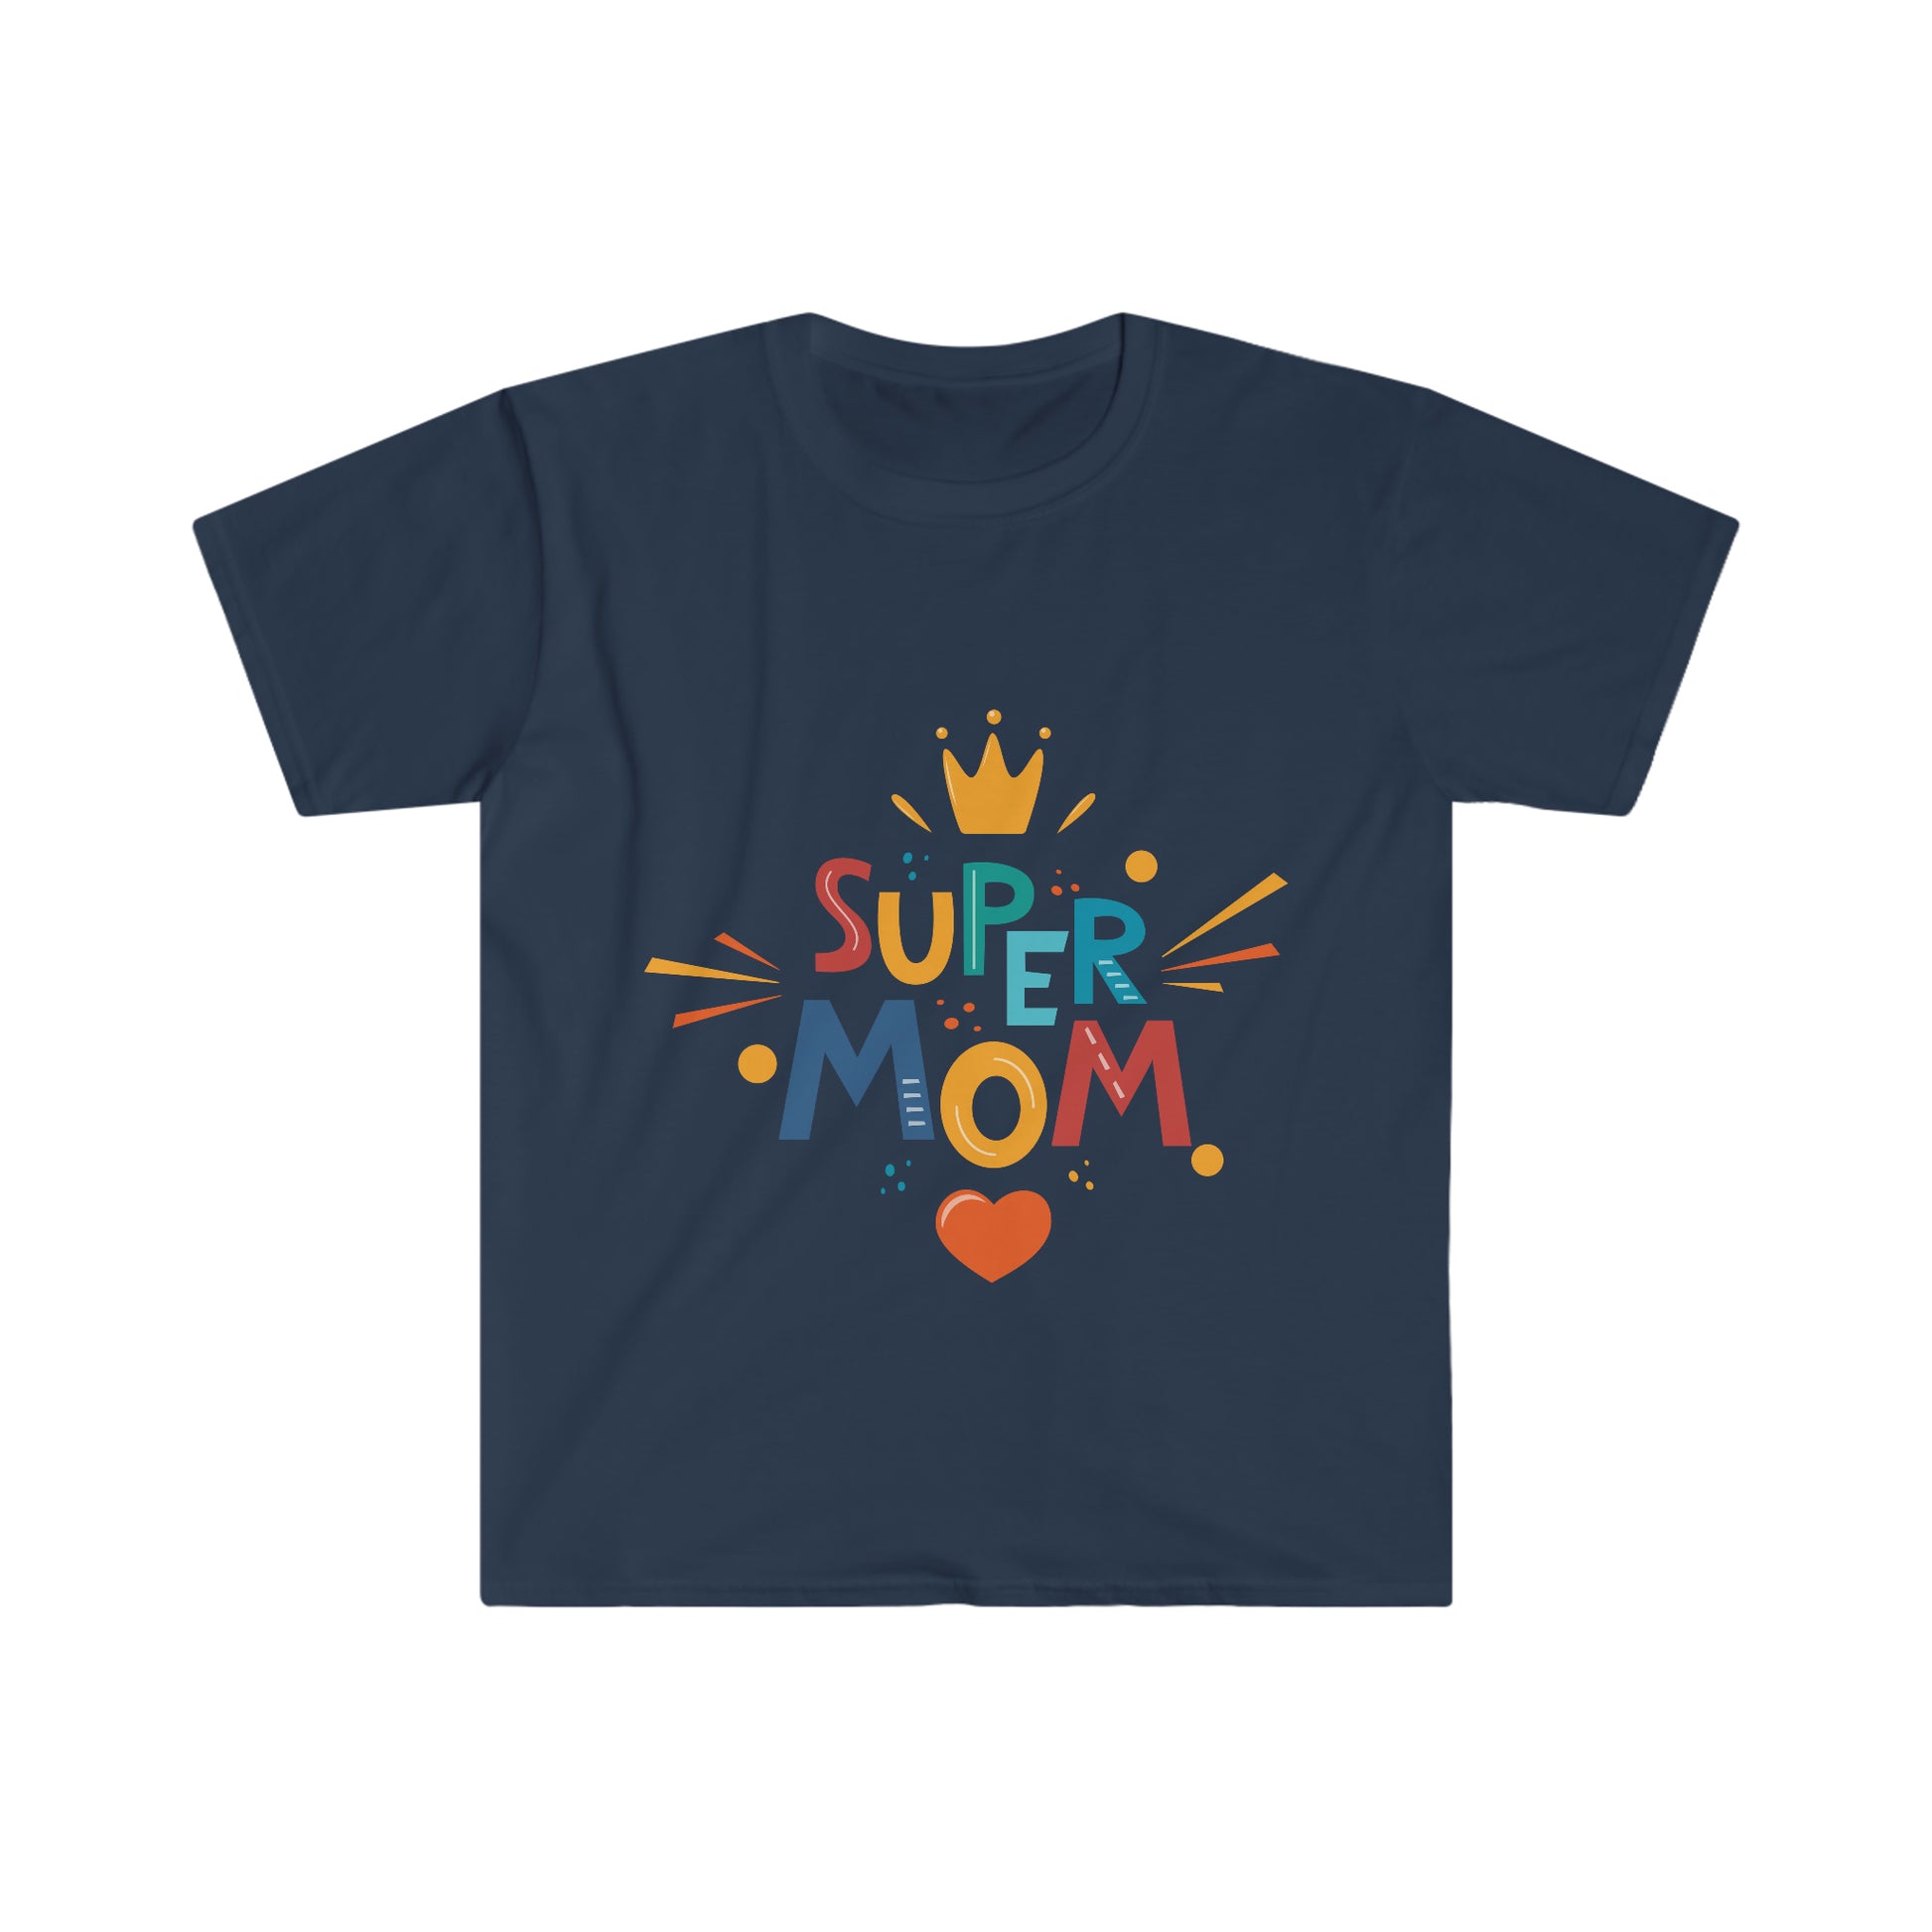 Looking for the perfect Mother's Day gift? Surprise Mom with our 100% cotton Super Mom navy softstyle t-shirt